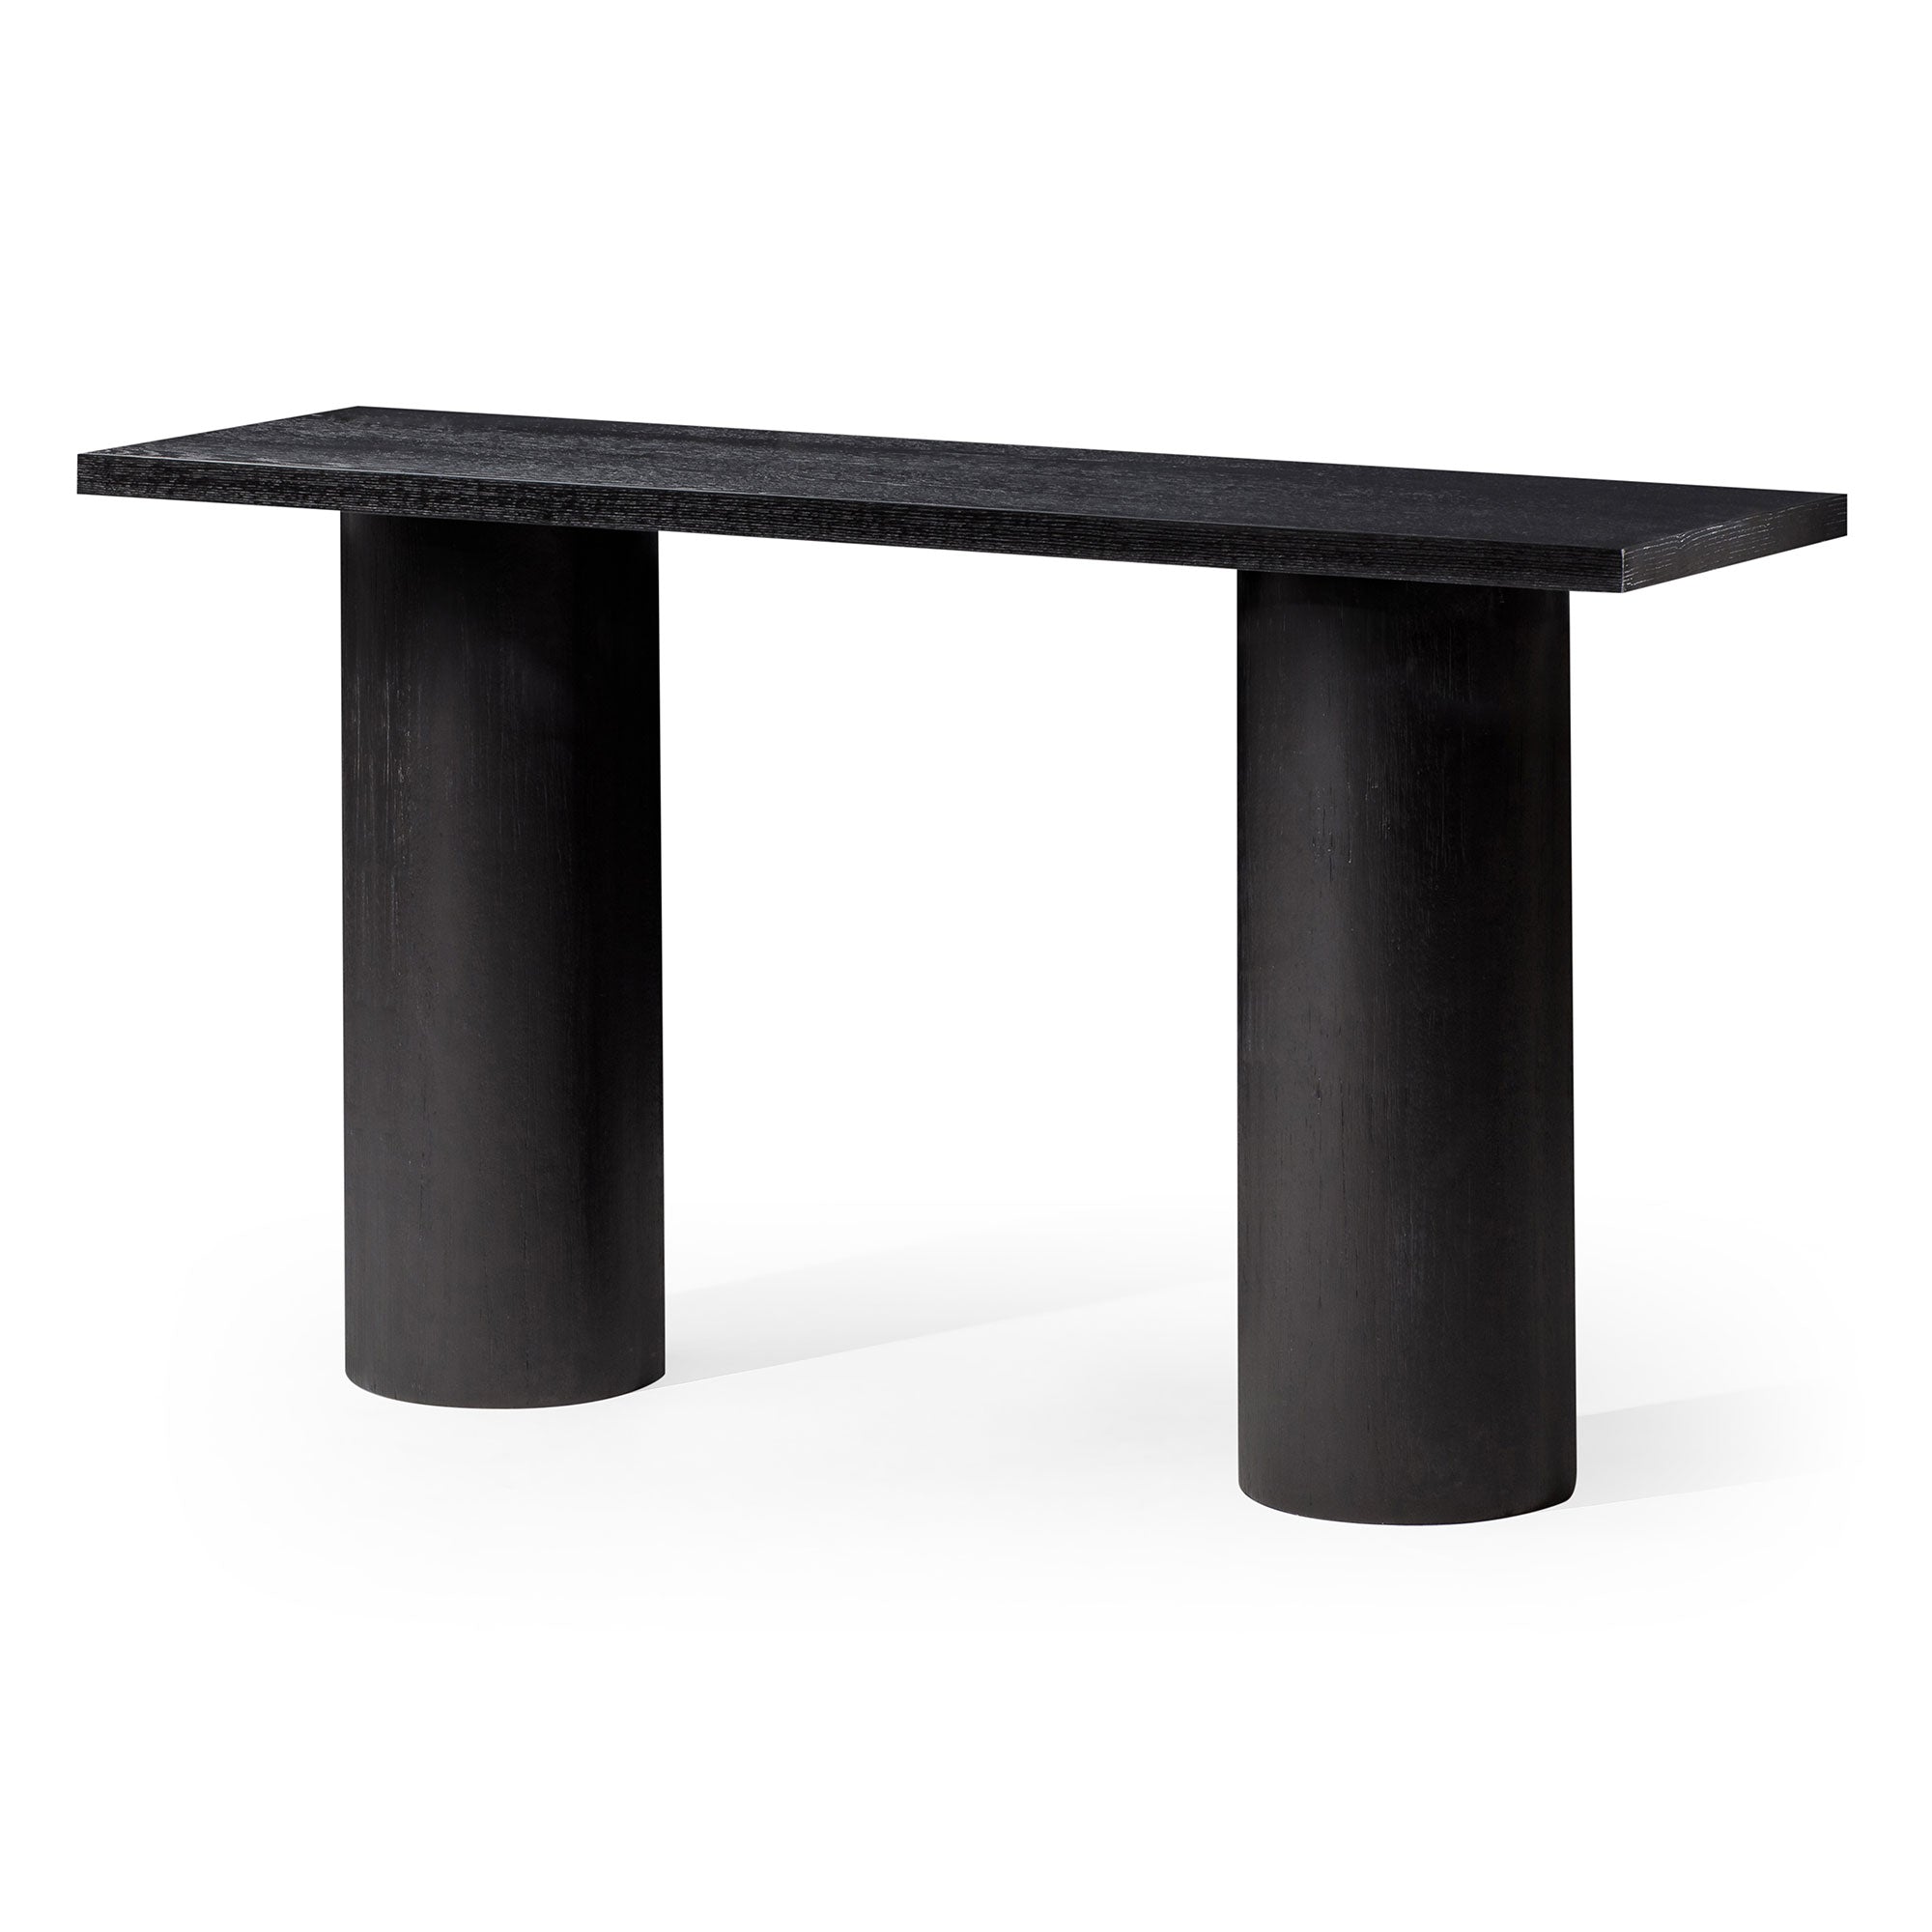 Lana Contemporary Wooden Console Table in Refined Black Finish